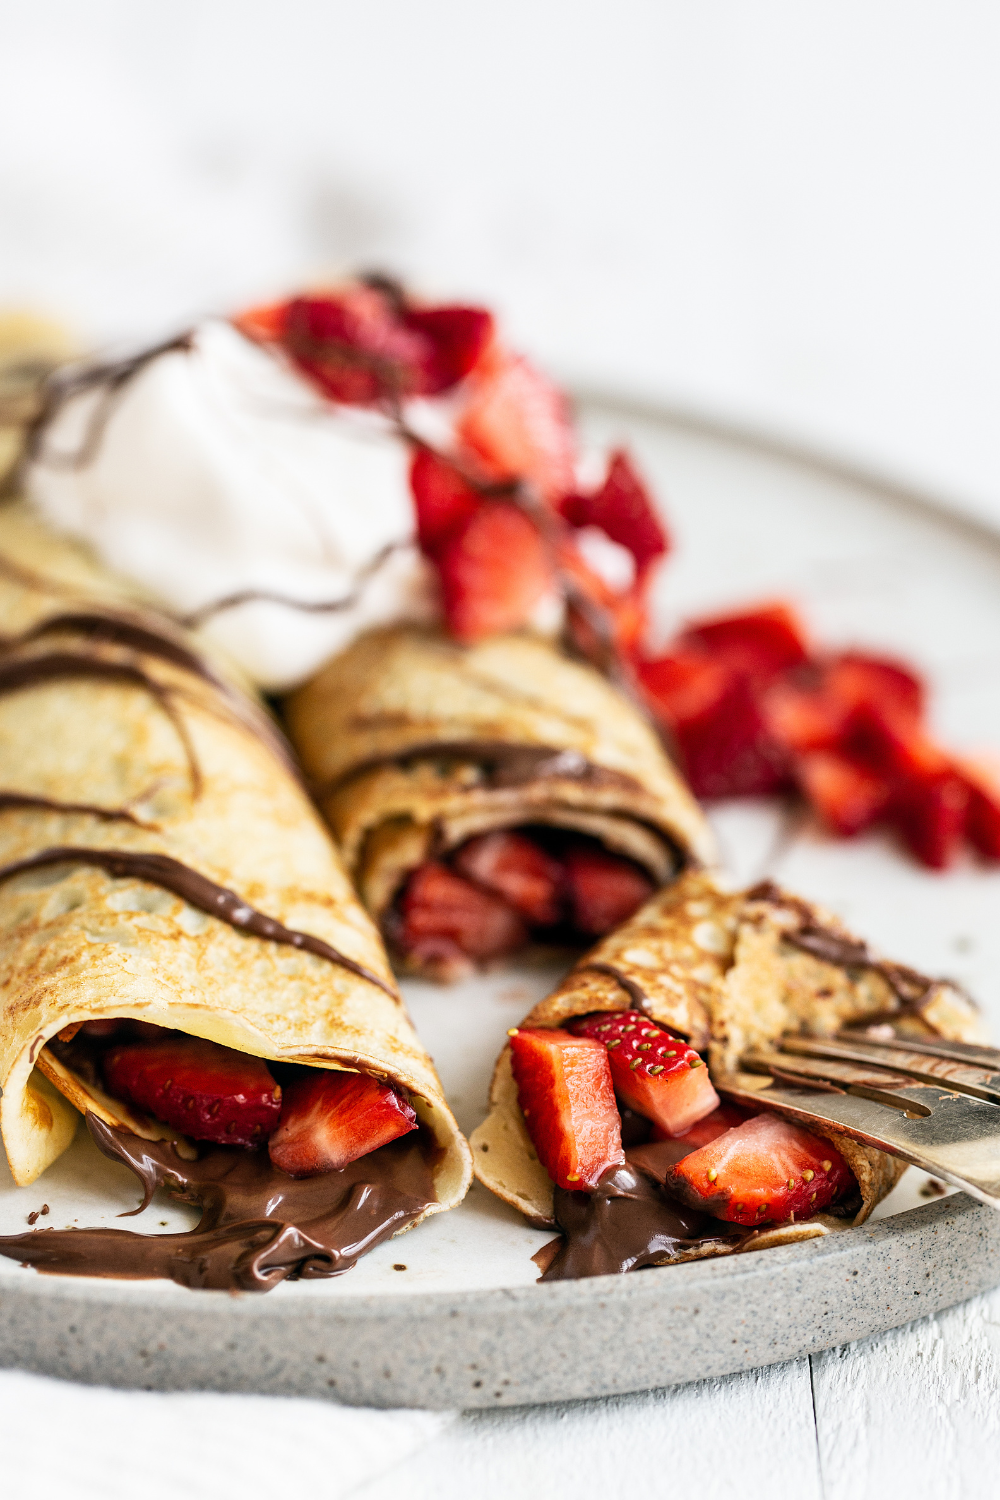 How to Make THE BEST Crepes